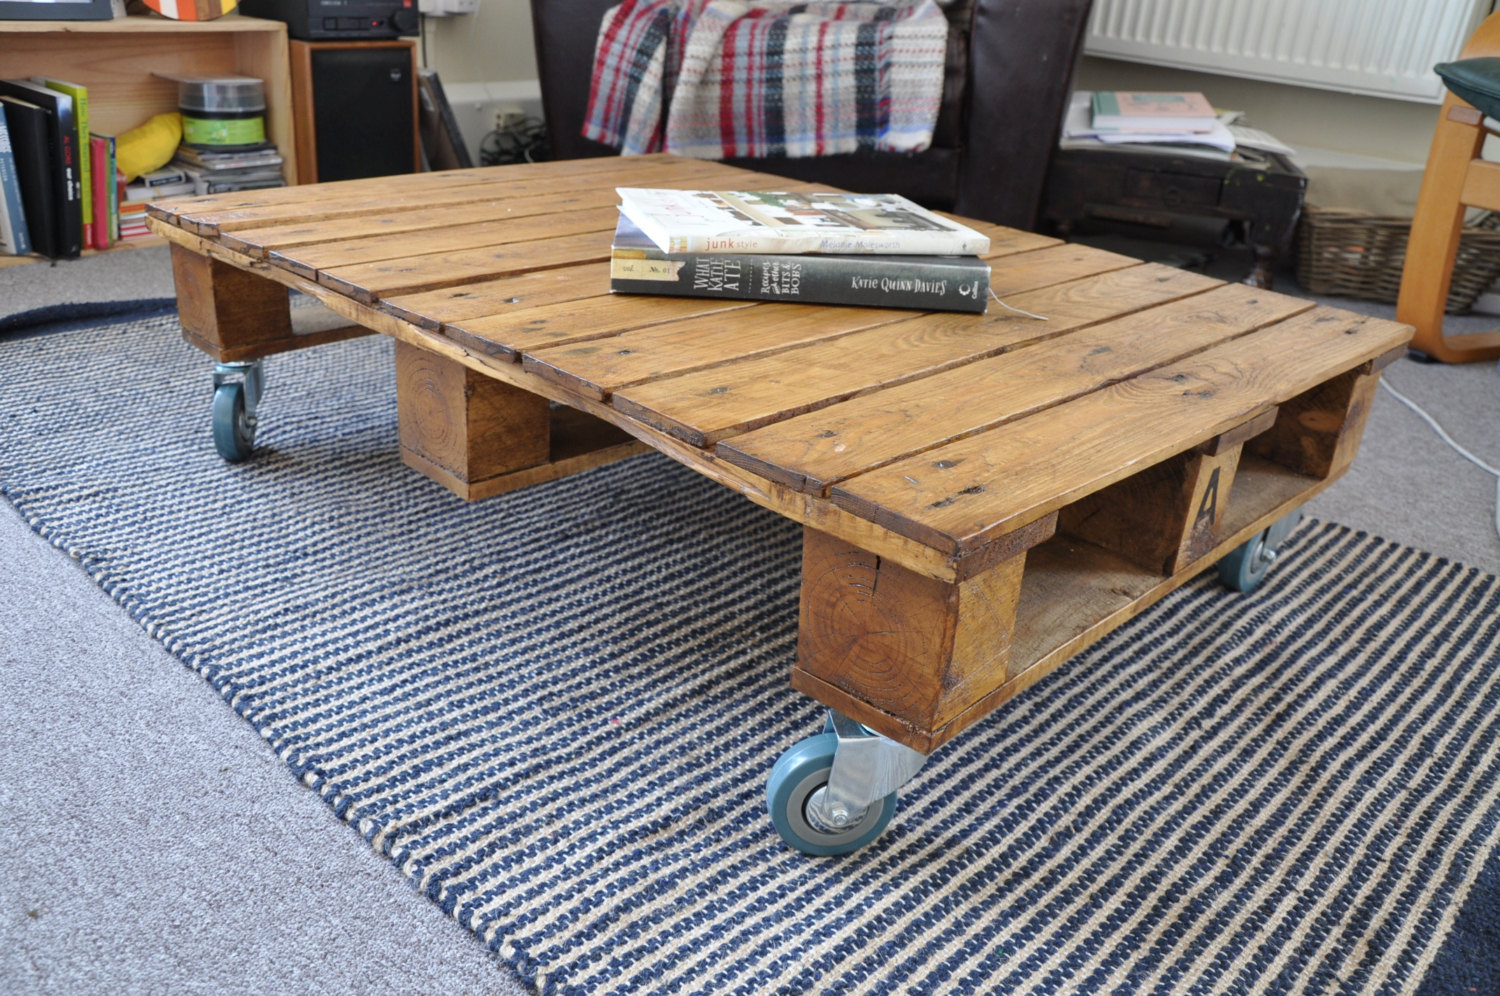 18 Useful and Easy DIY Ideas to Repurpose Old Pallet Wood